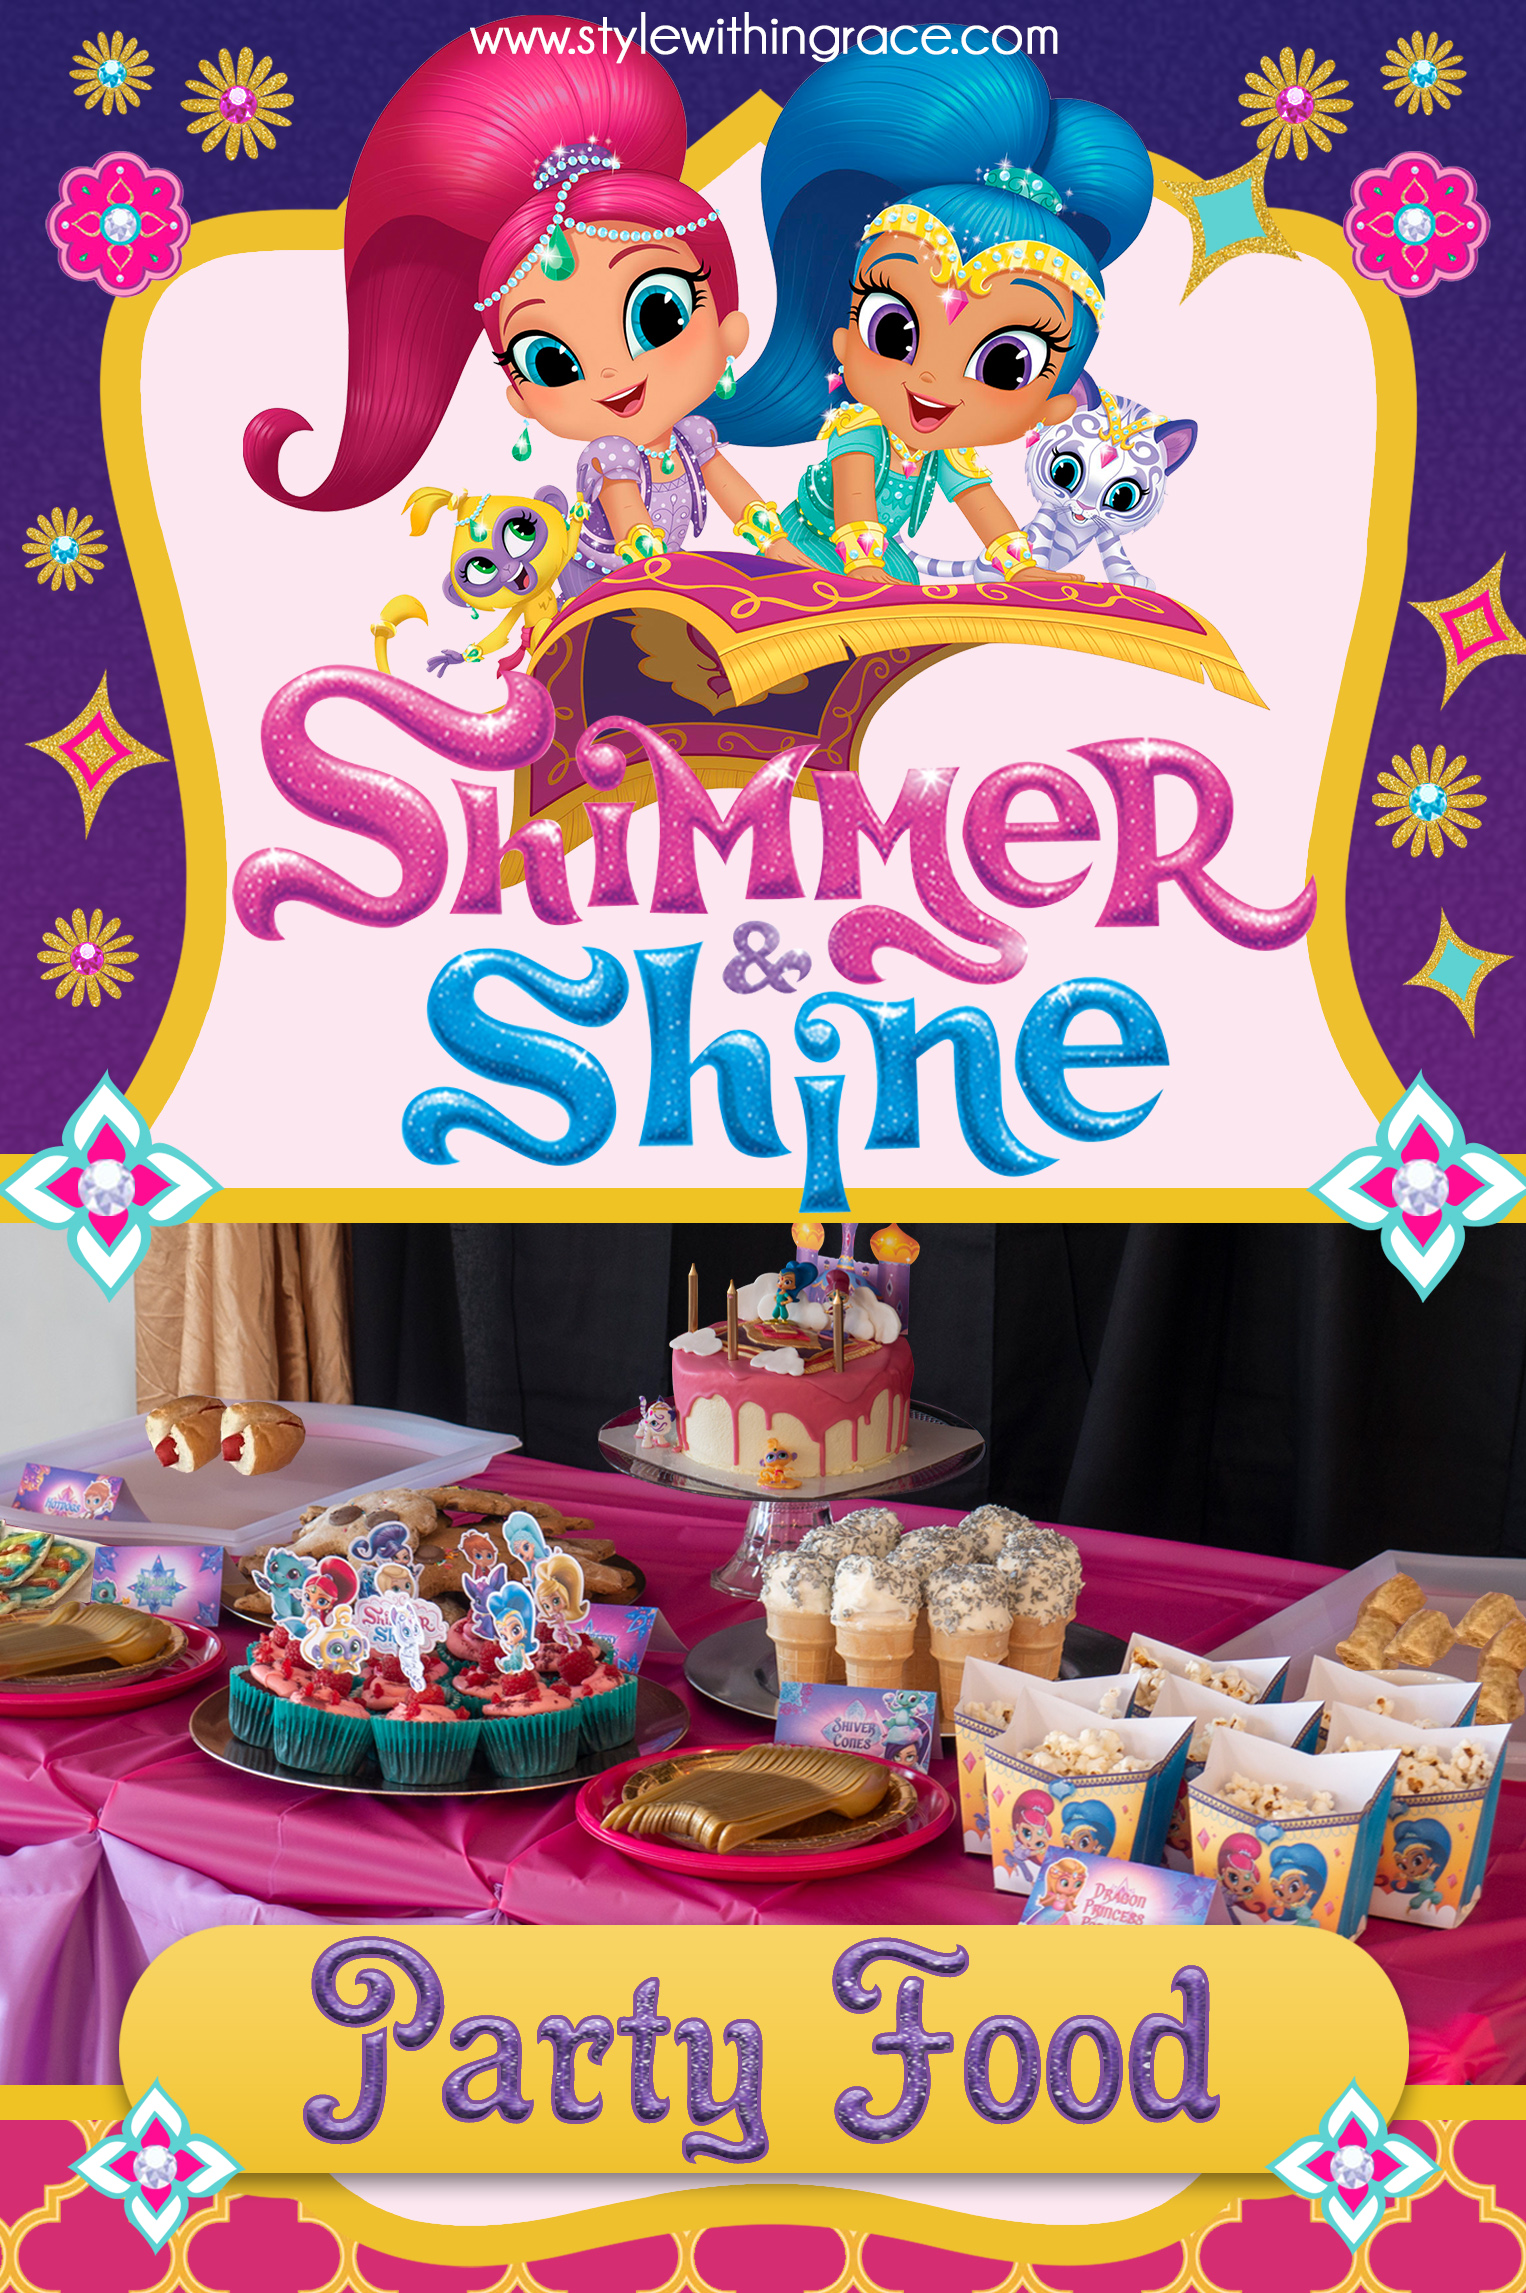 Shimmer and Shine Birthday Party Food Pinterest